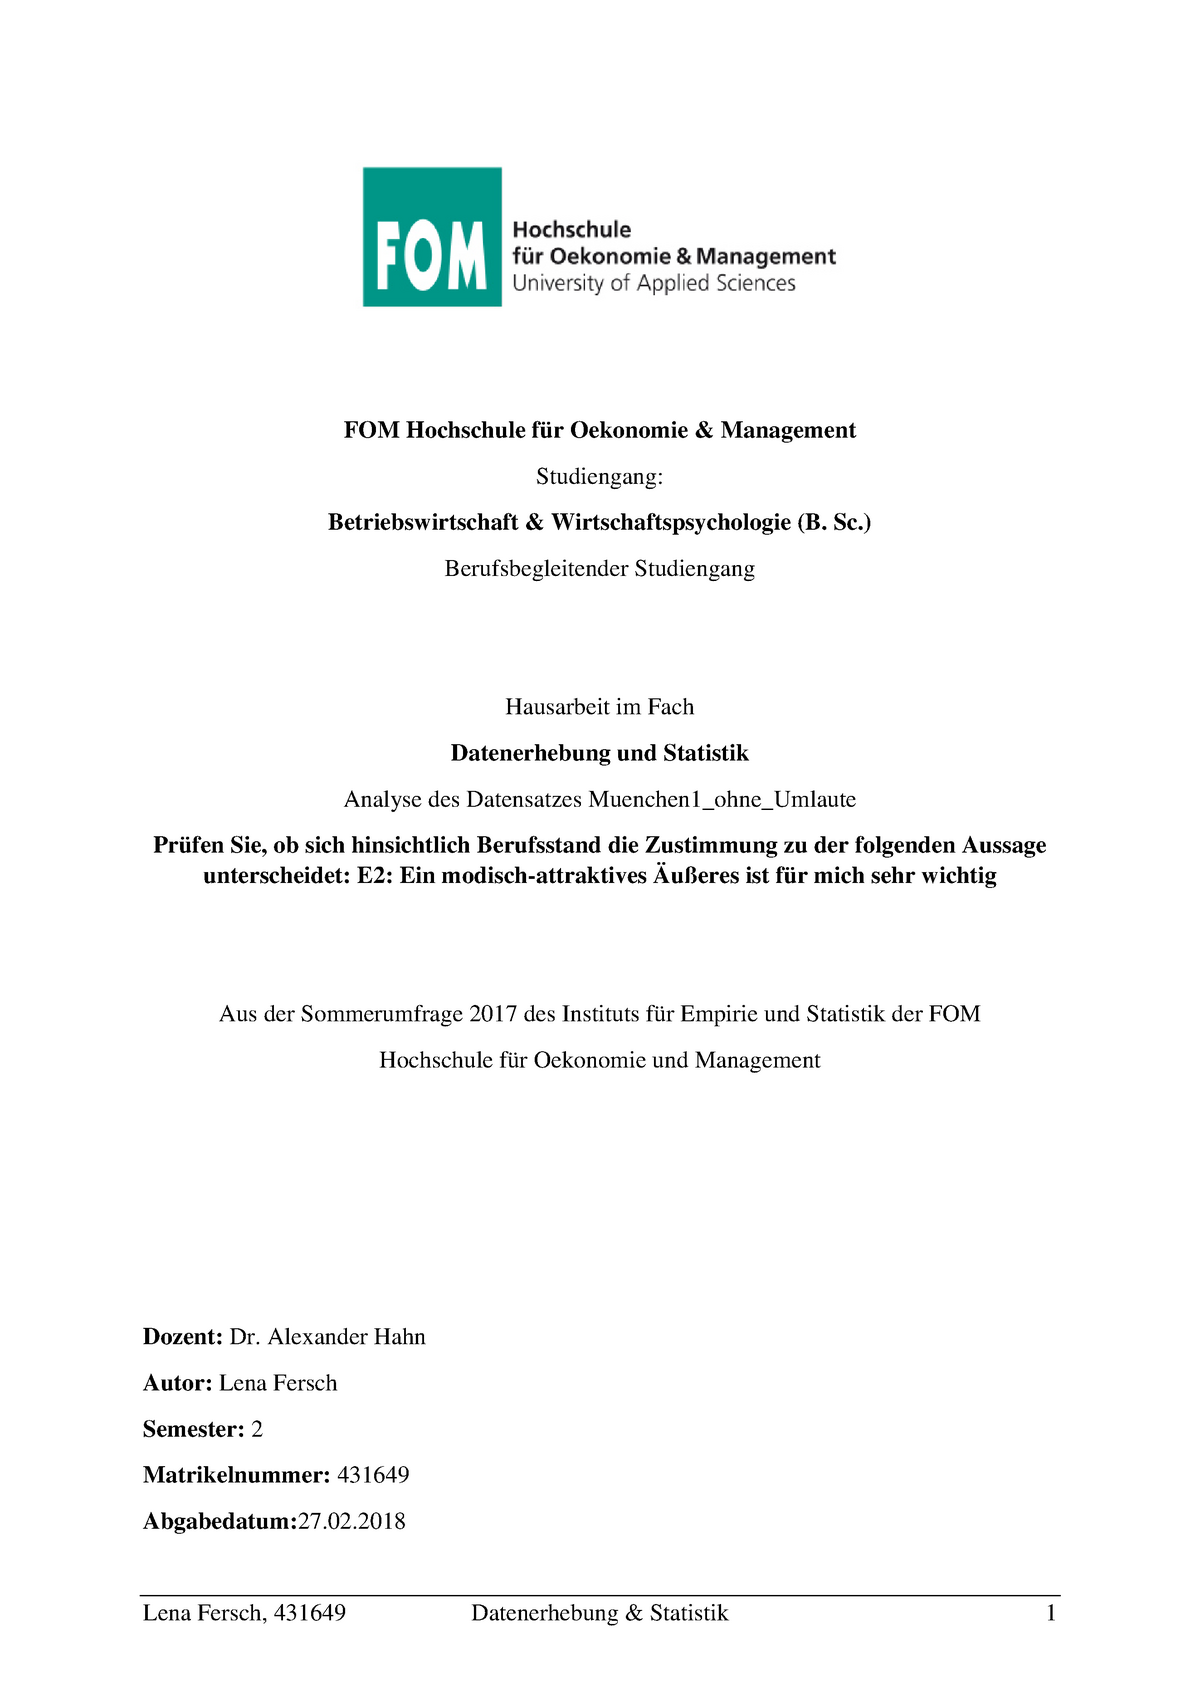 bachelor thesis fom beispiel